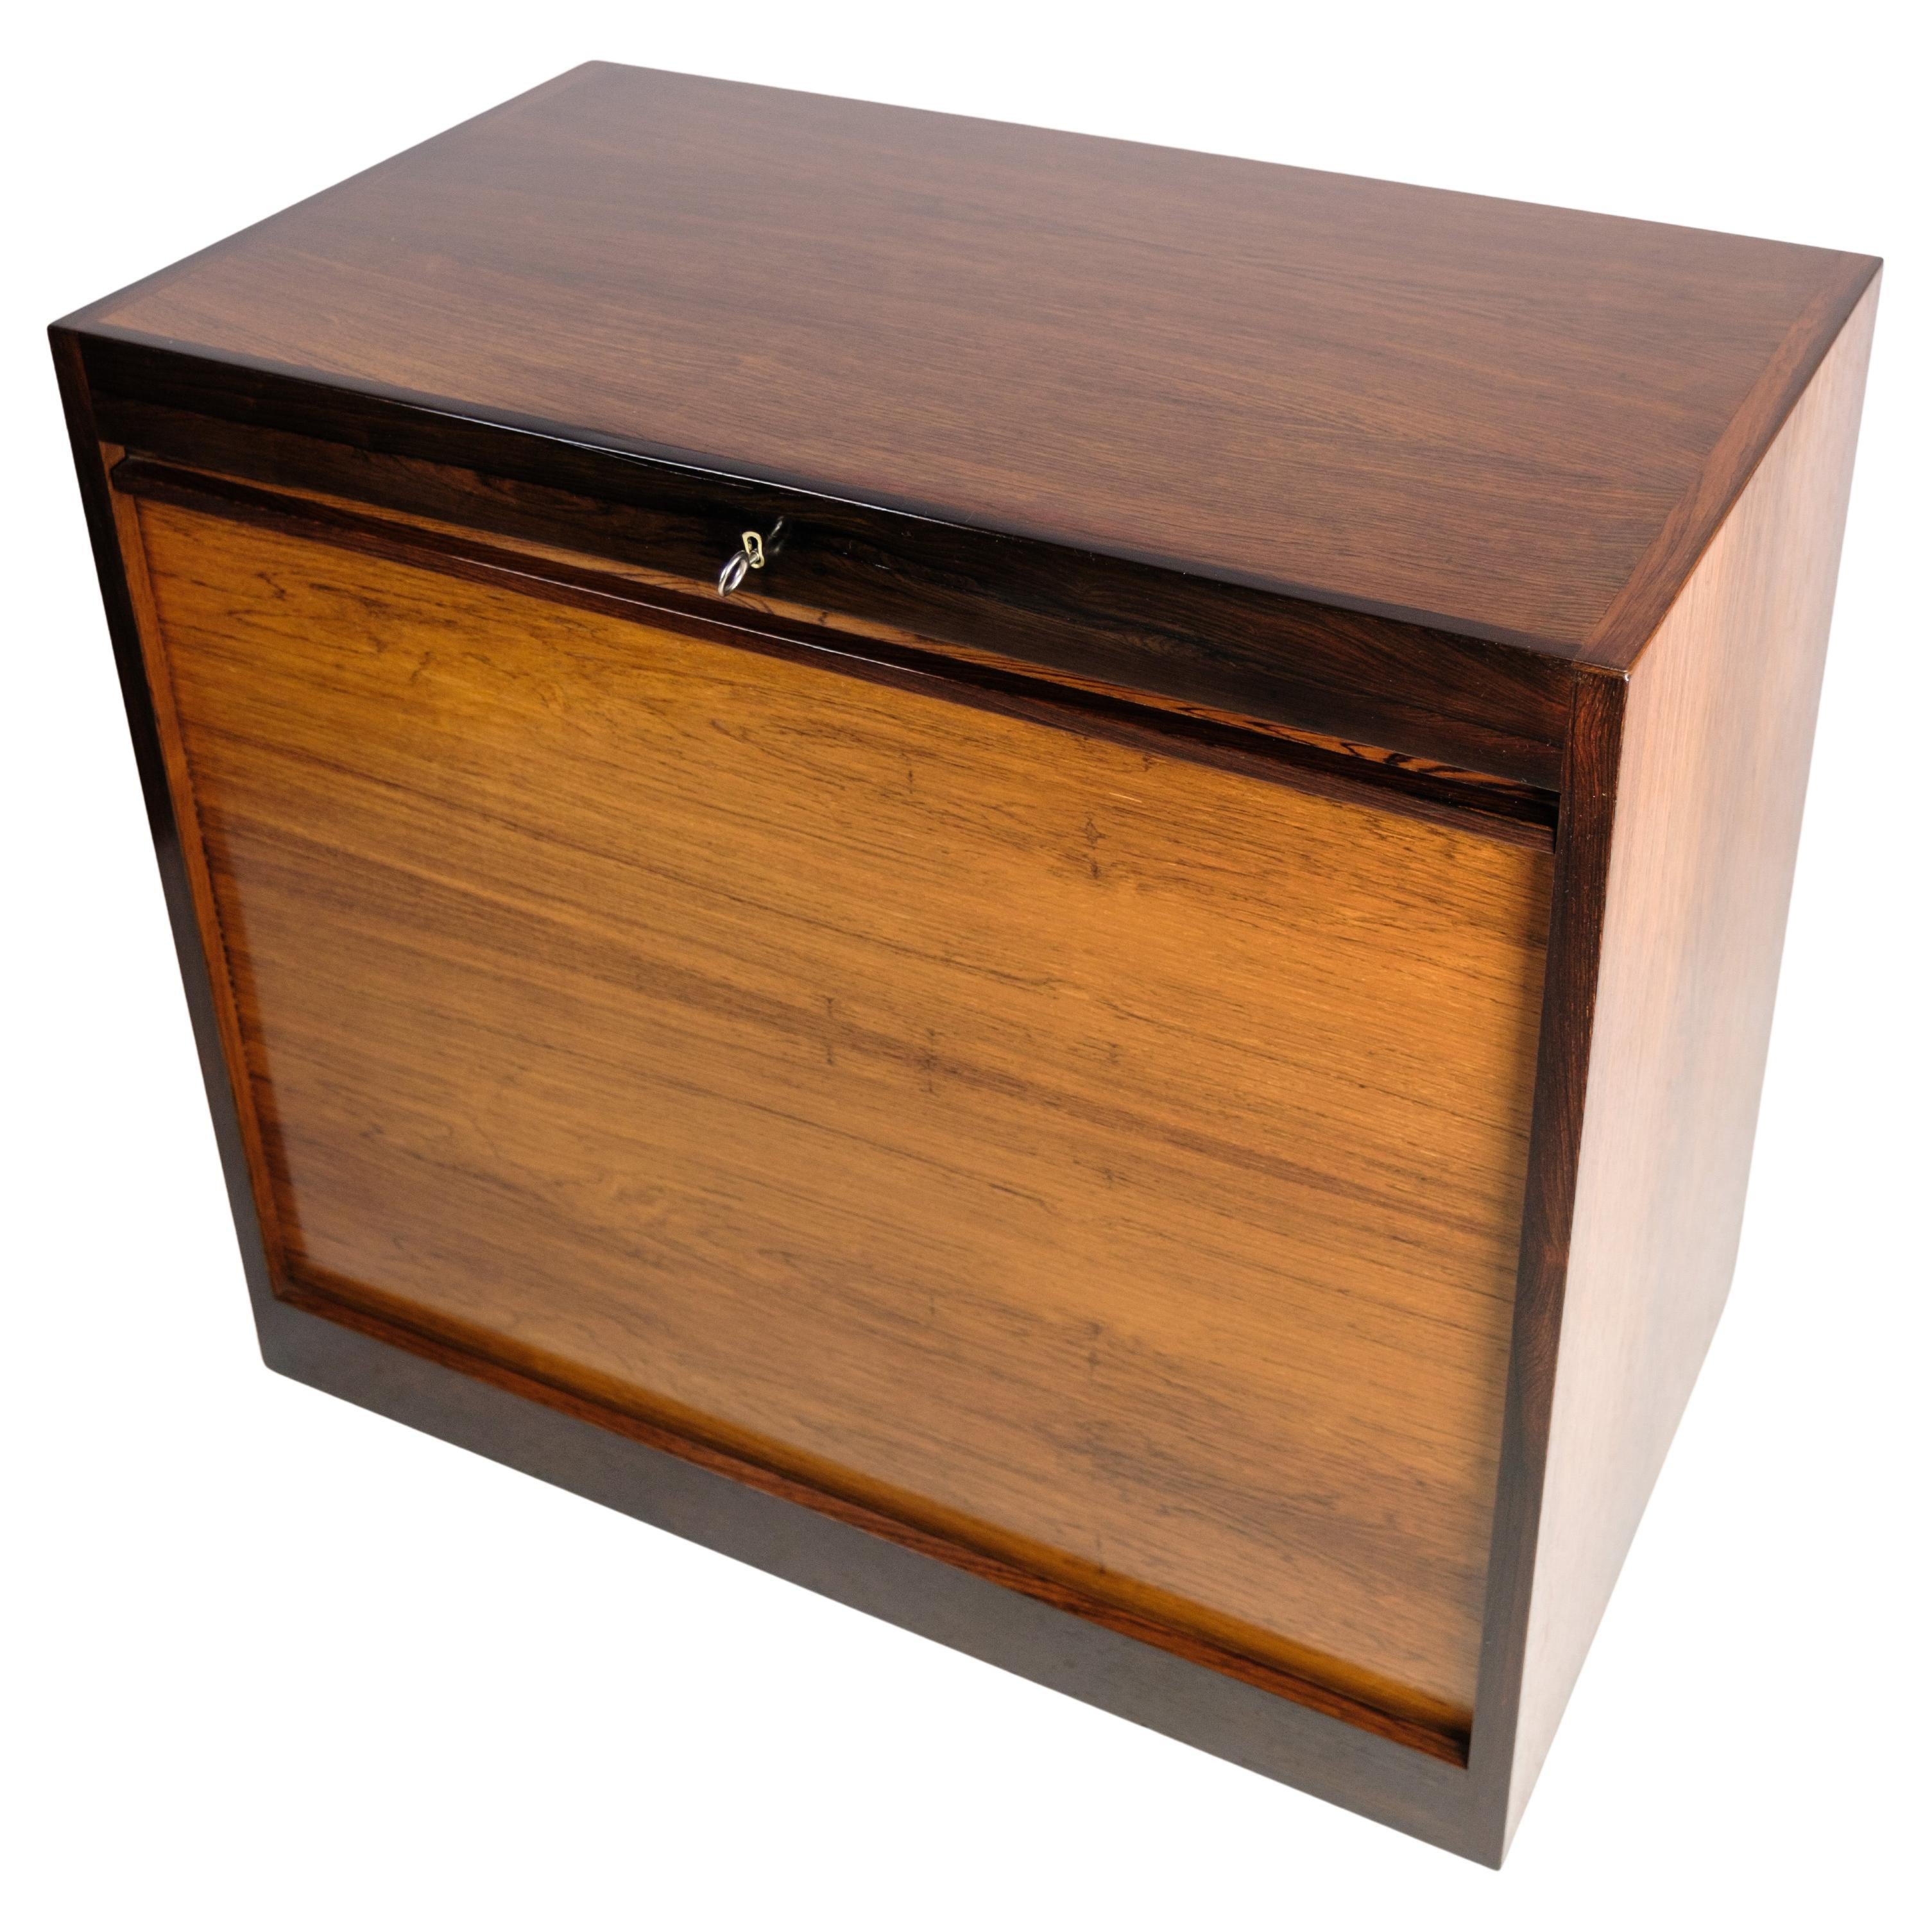 Cabinet With Pull-Up Door Made In Rosewood, Danish Design From 1960s